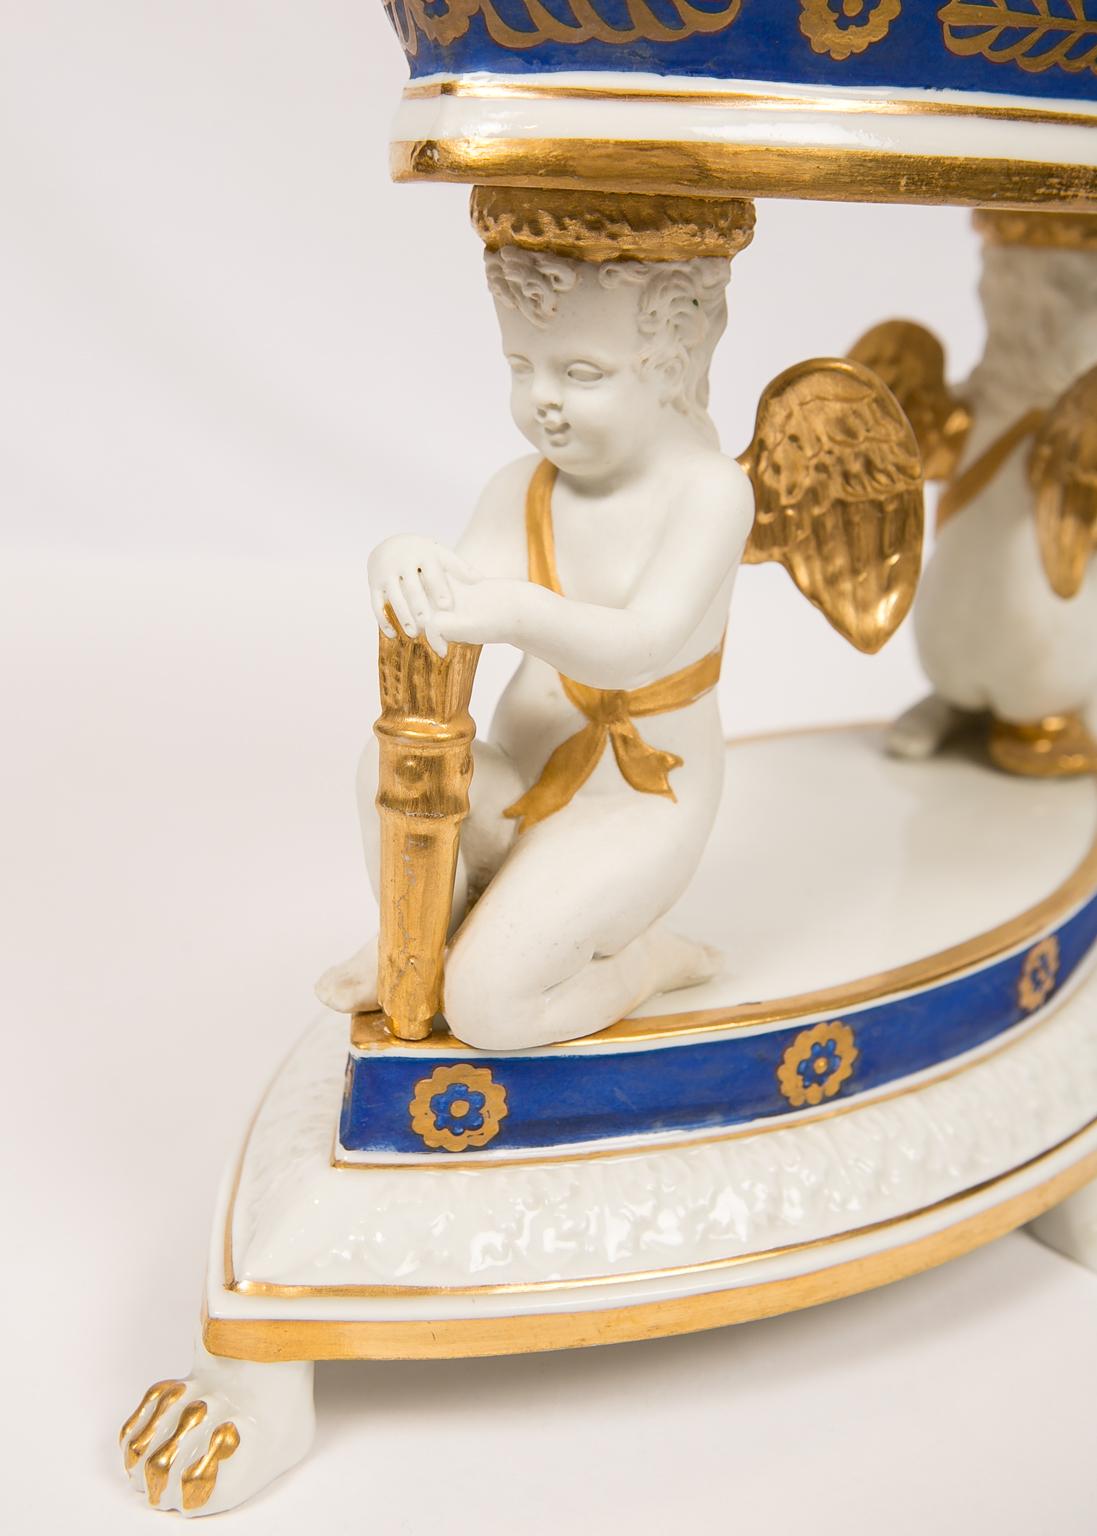 Antique French Porcelain Centerpiece Made by Samson et Cie. Late 19th Century 2